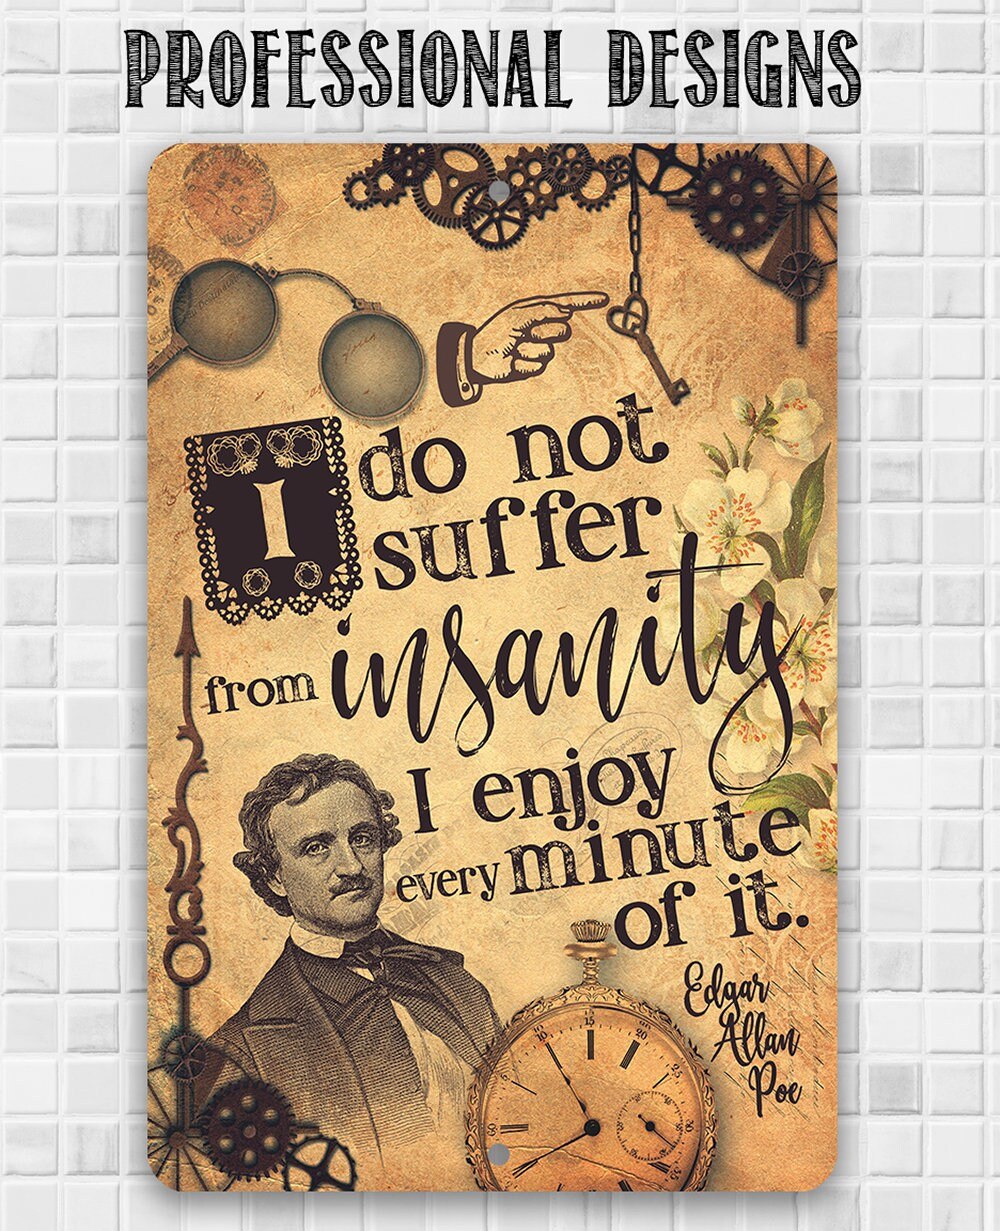 I Do Not Suffer From Insanity, I Enjoy Every Minute Of It - Edgar Allan Poe 8" x 12" or 12" x 18" Aluminum Tin Awesome Metal Poster Lone Star Art 